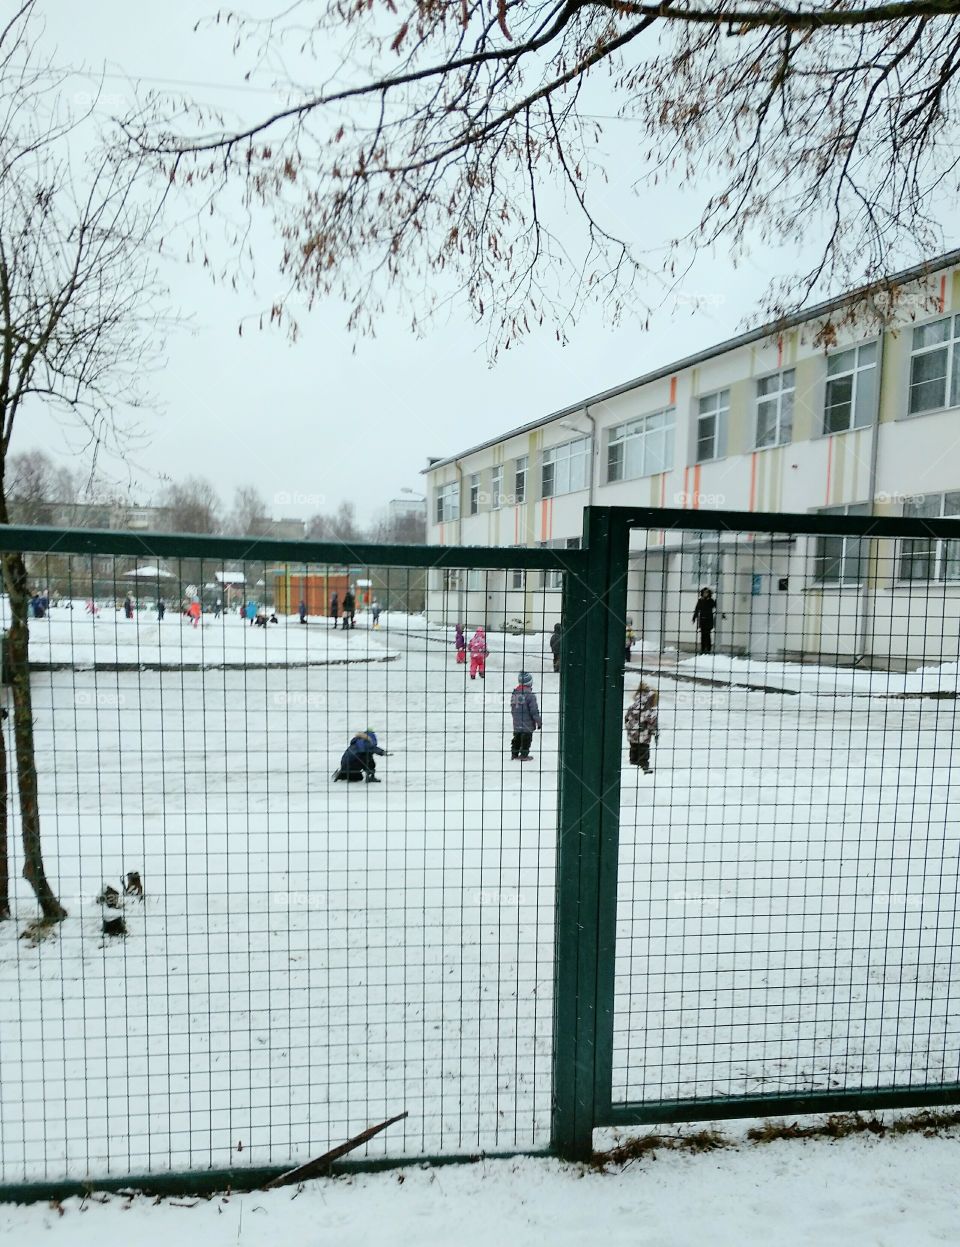 Kids and winter